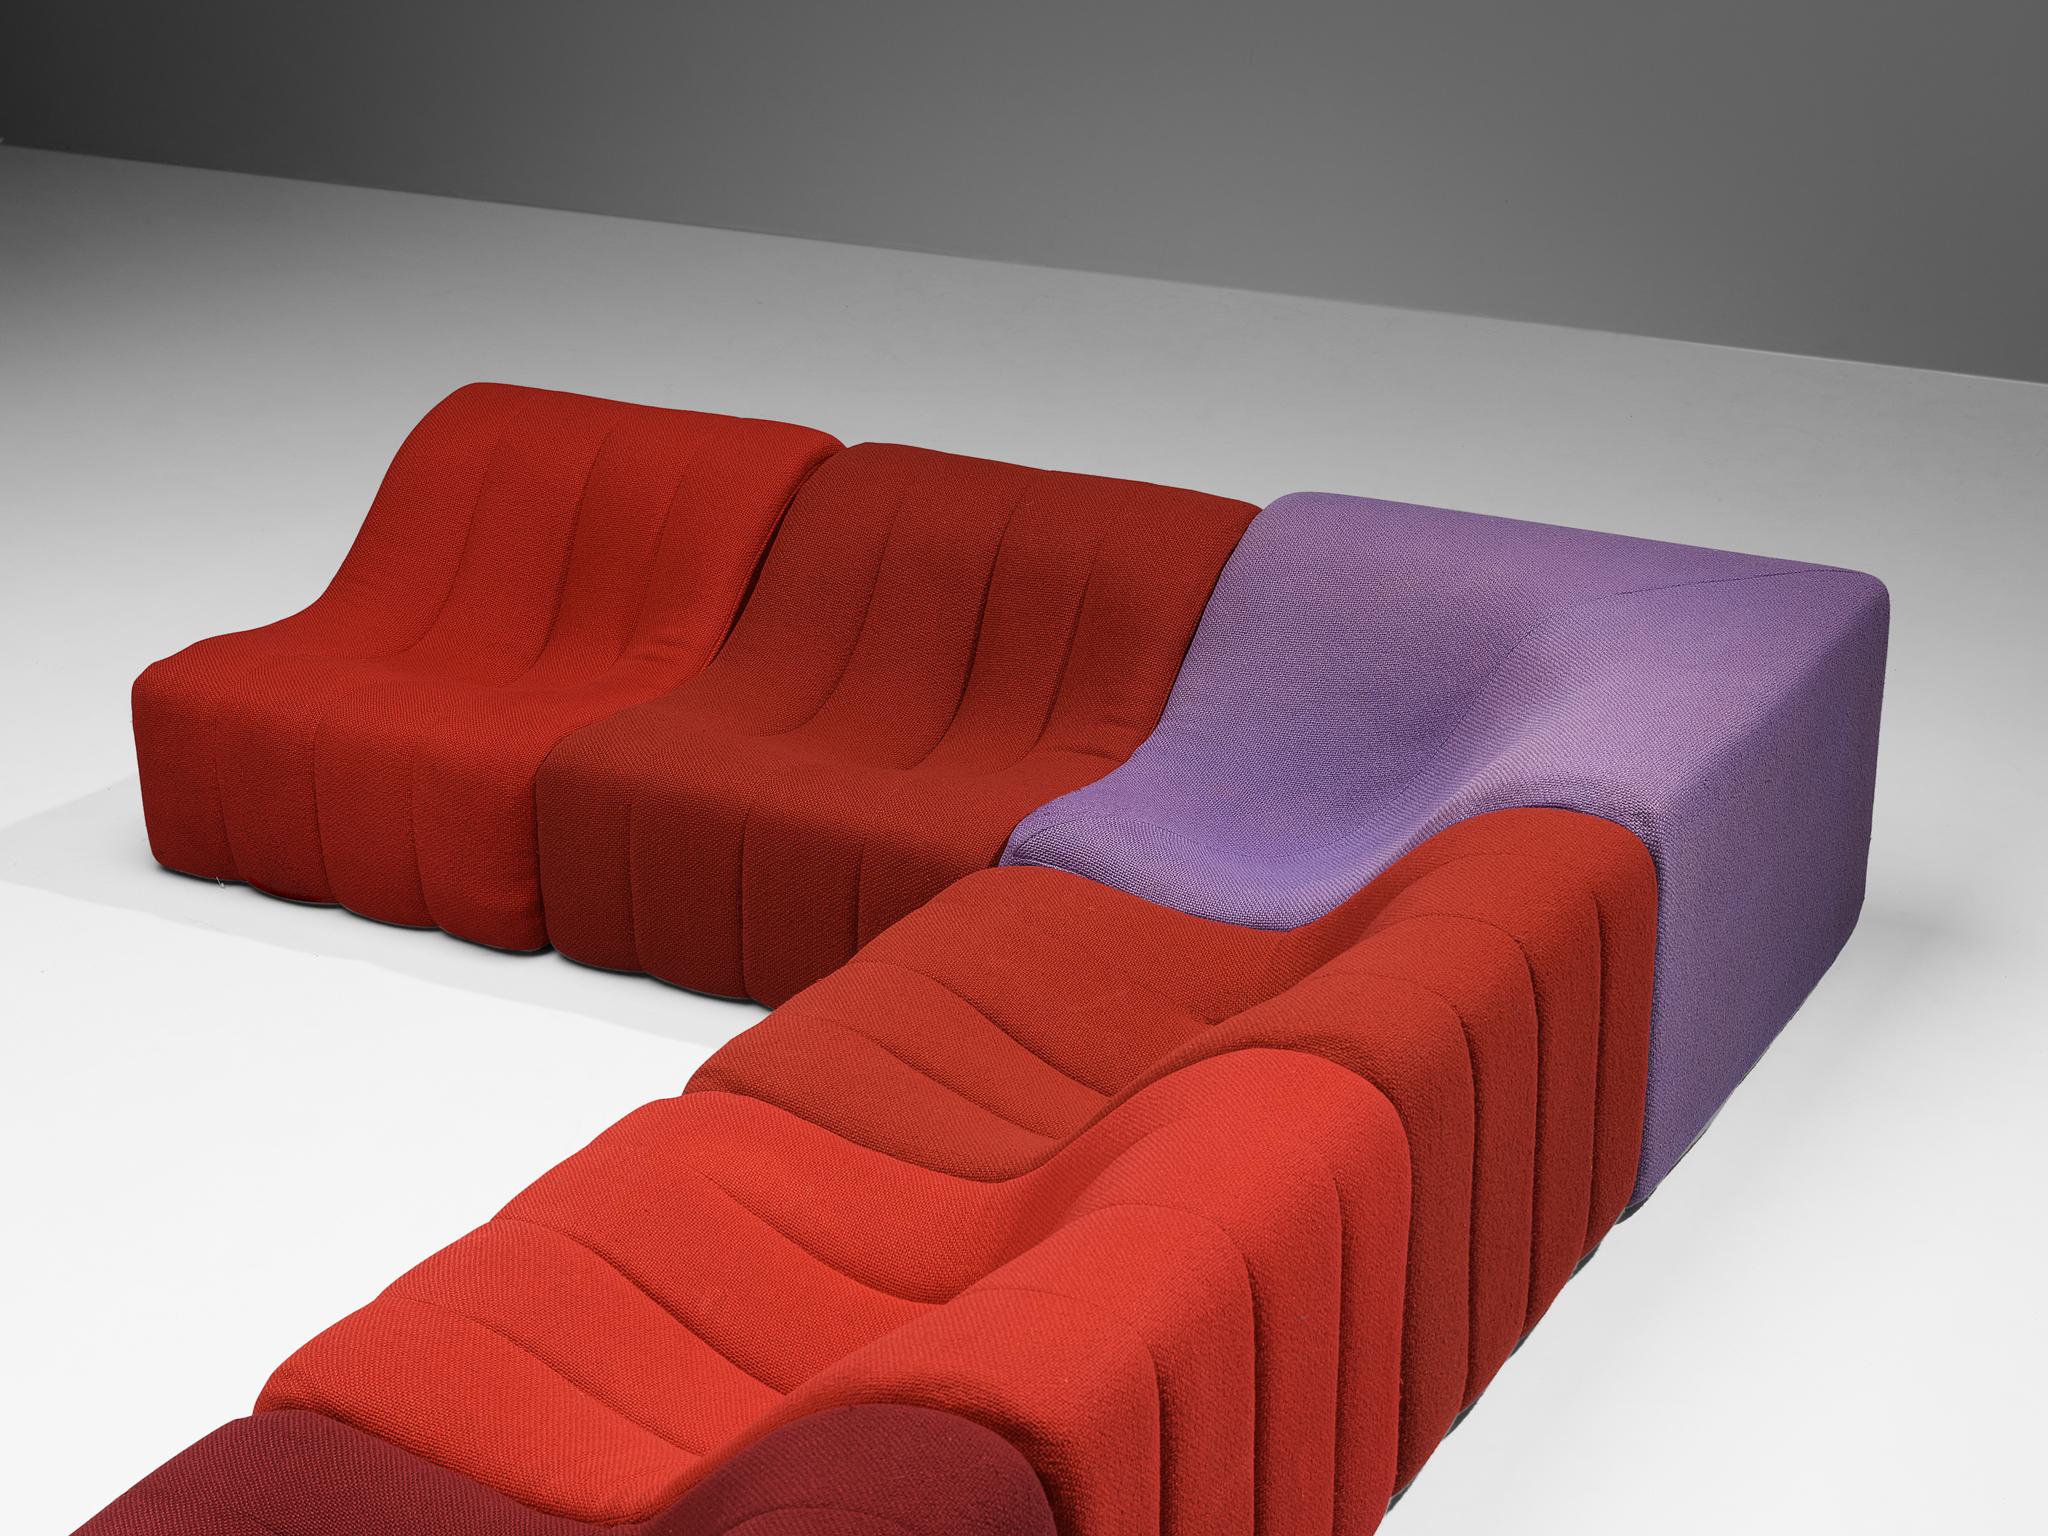 Kwok Hoi Chan for Steiner 'Chromatic' Modular Sofa in Red Purple Colors  For Sale 2